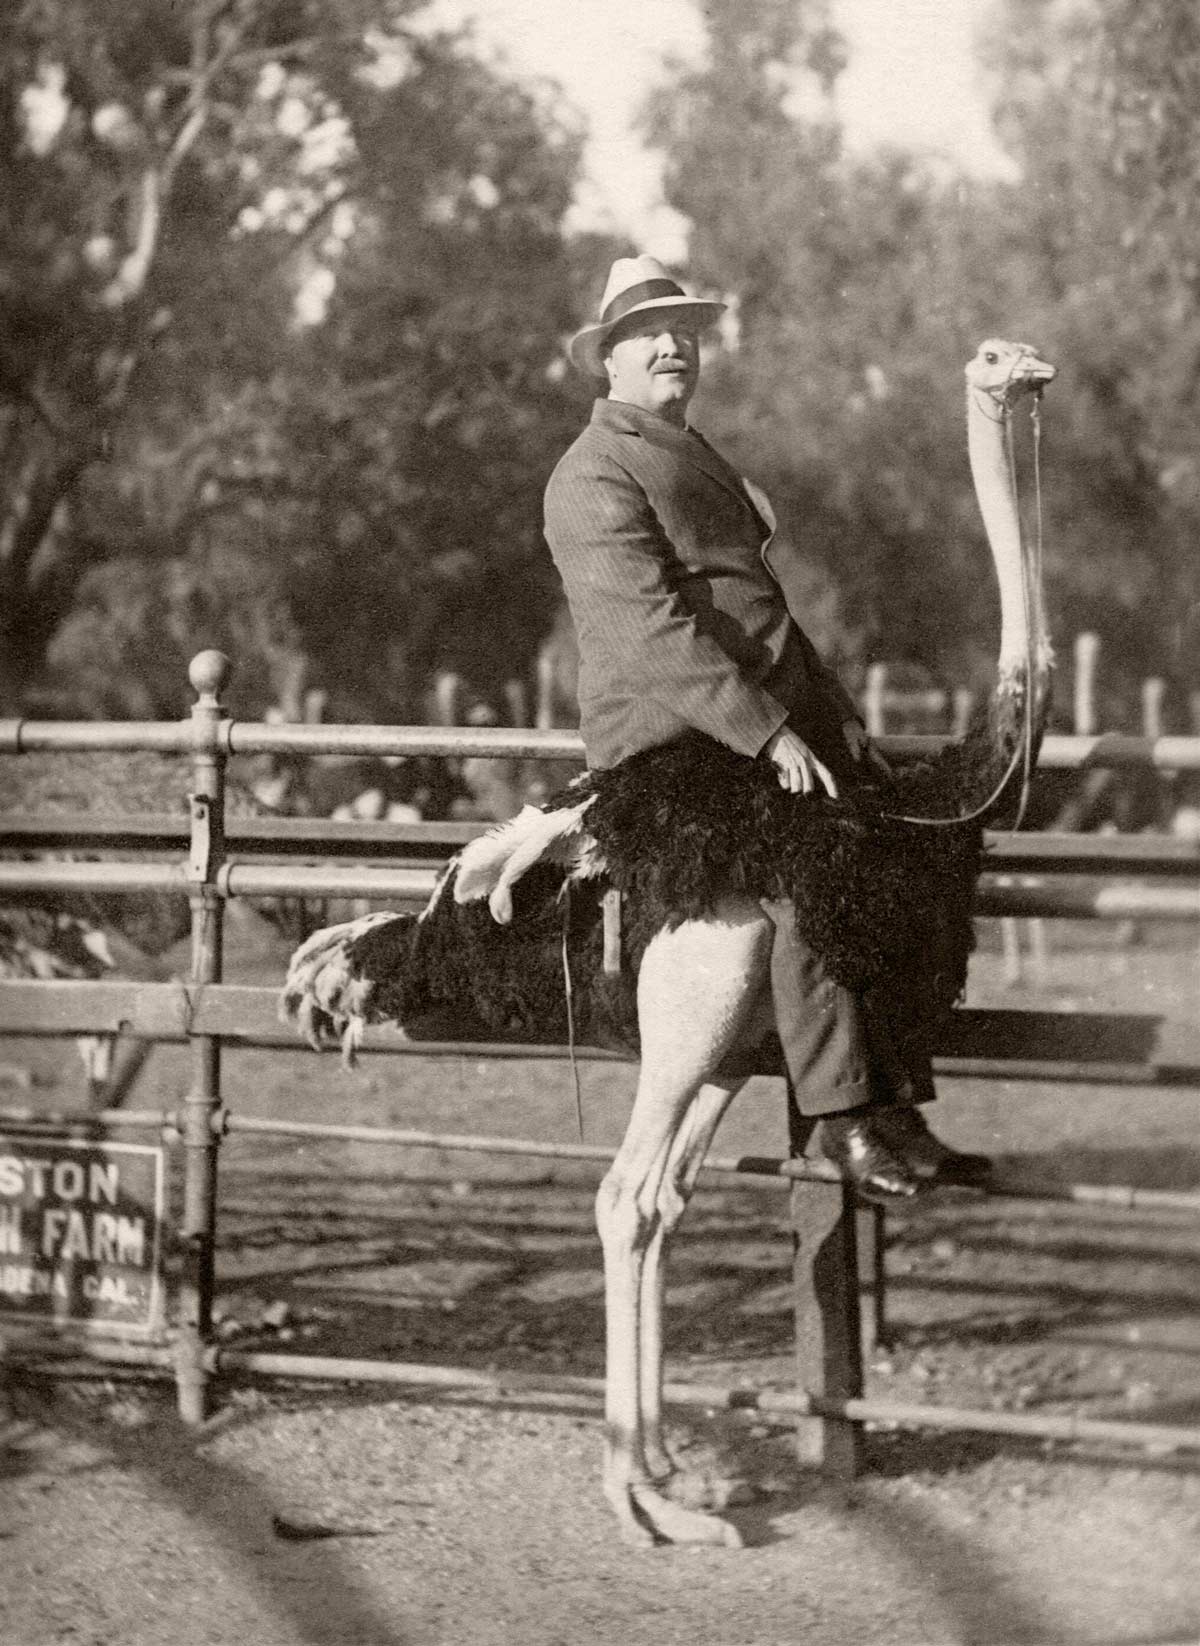 My great-grandfather at the Cawston Ostrich Farm in South Pasadena, California, ca 1920